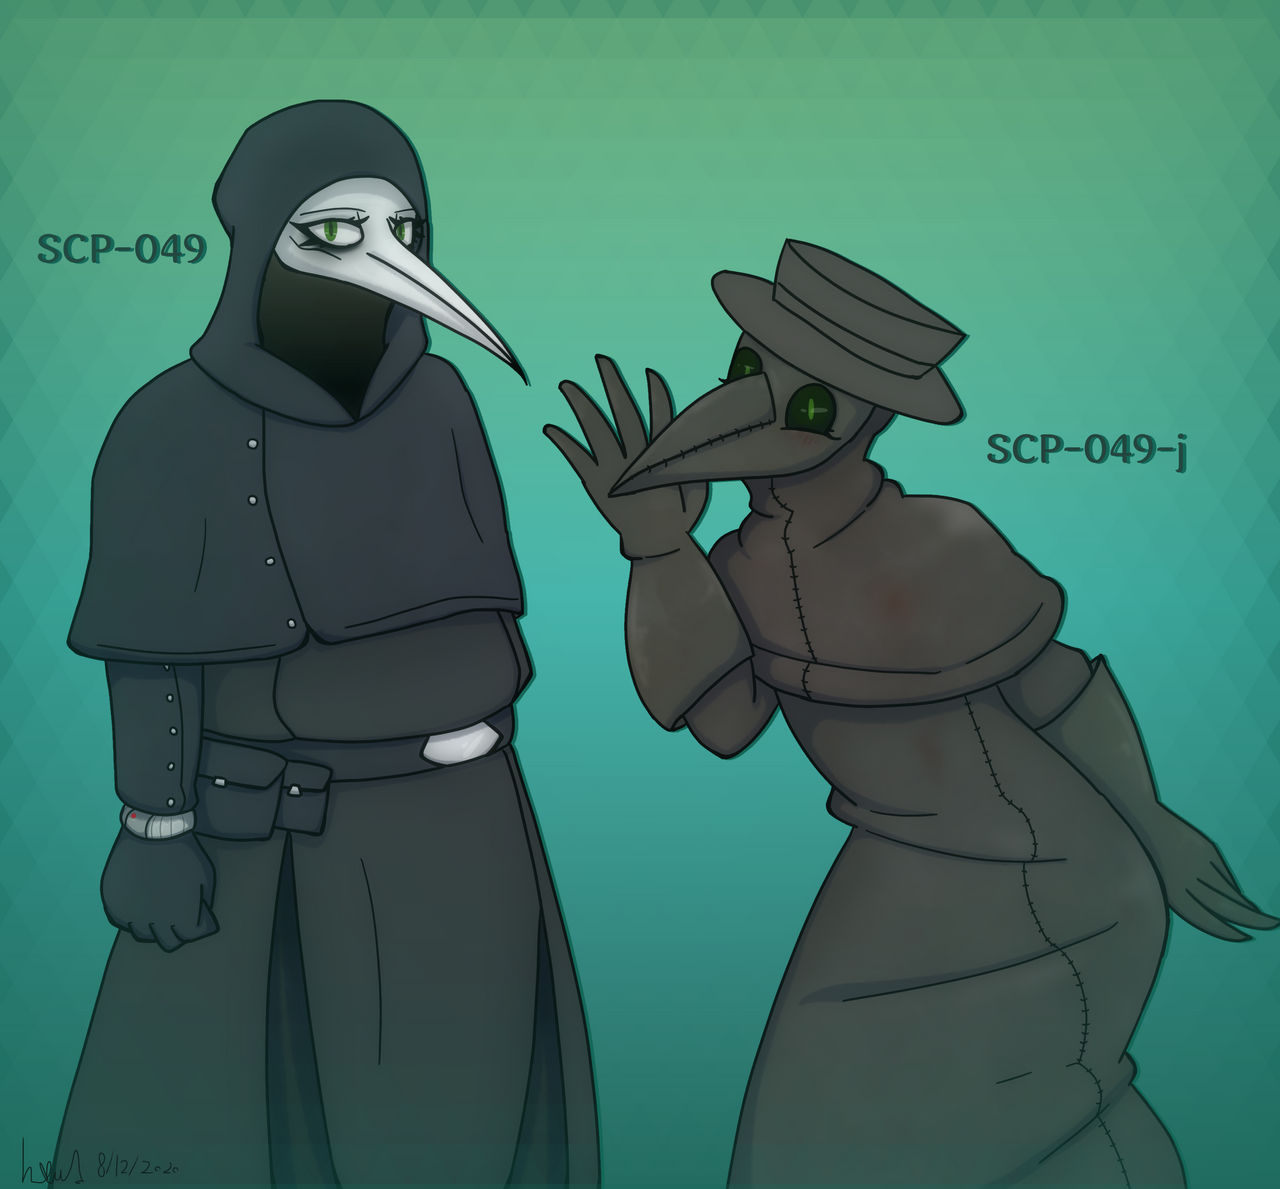 High Quality scp 049 & scp 049-J Blank Meme Template